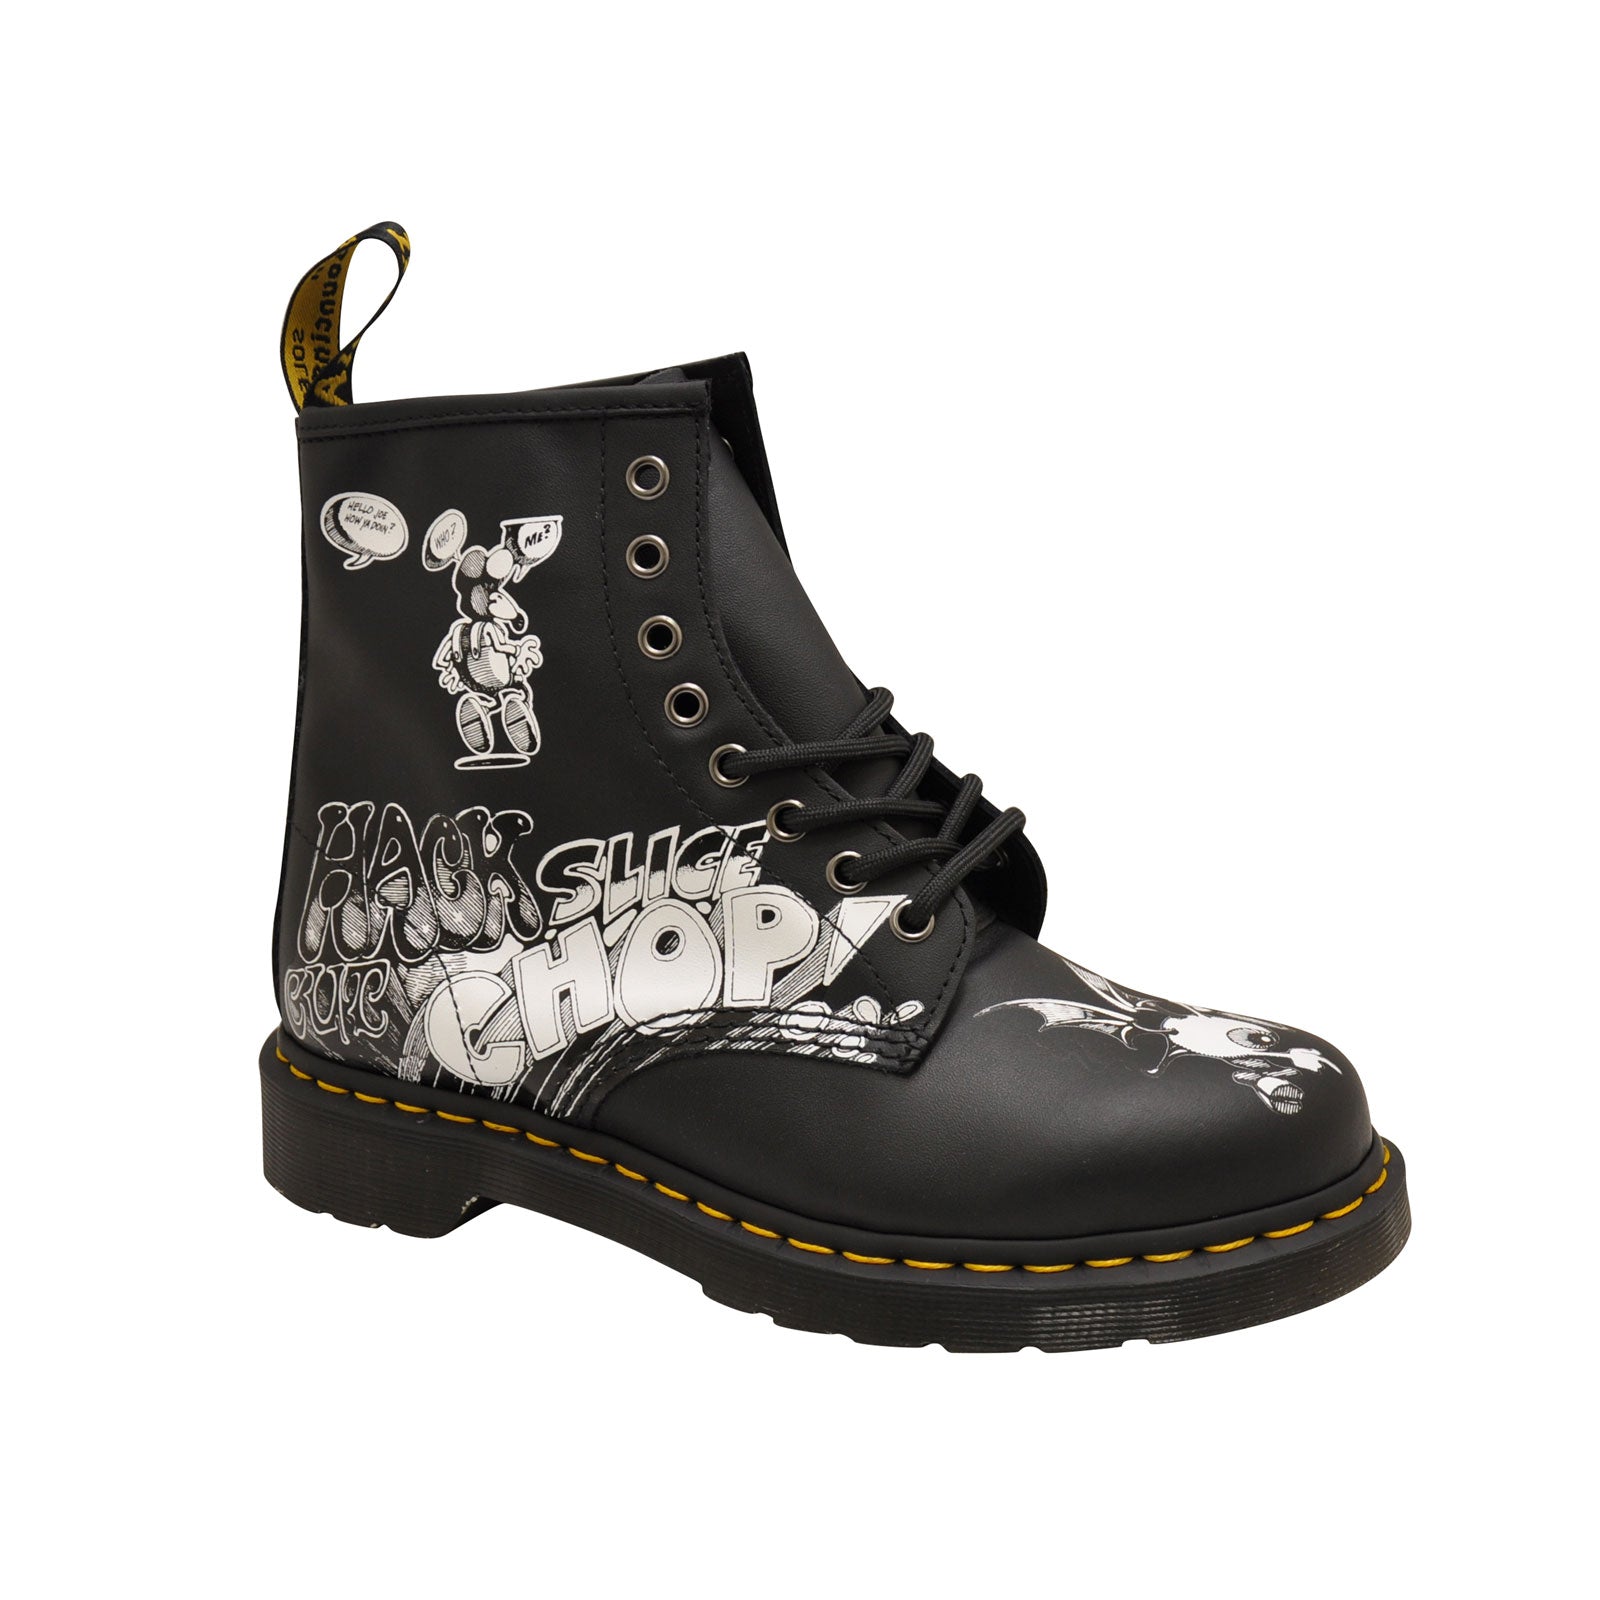 Cornwall groet tand Dr. Martens 1460 Rick Griffin 24876009 (Black/White) – Milano Shoes